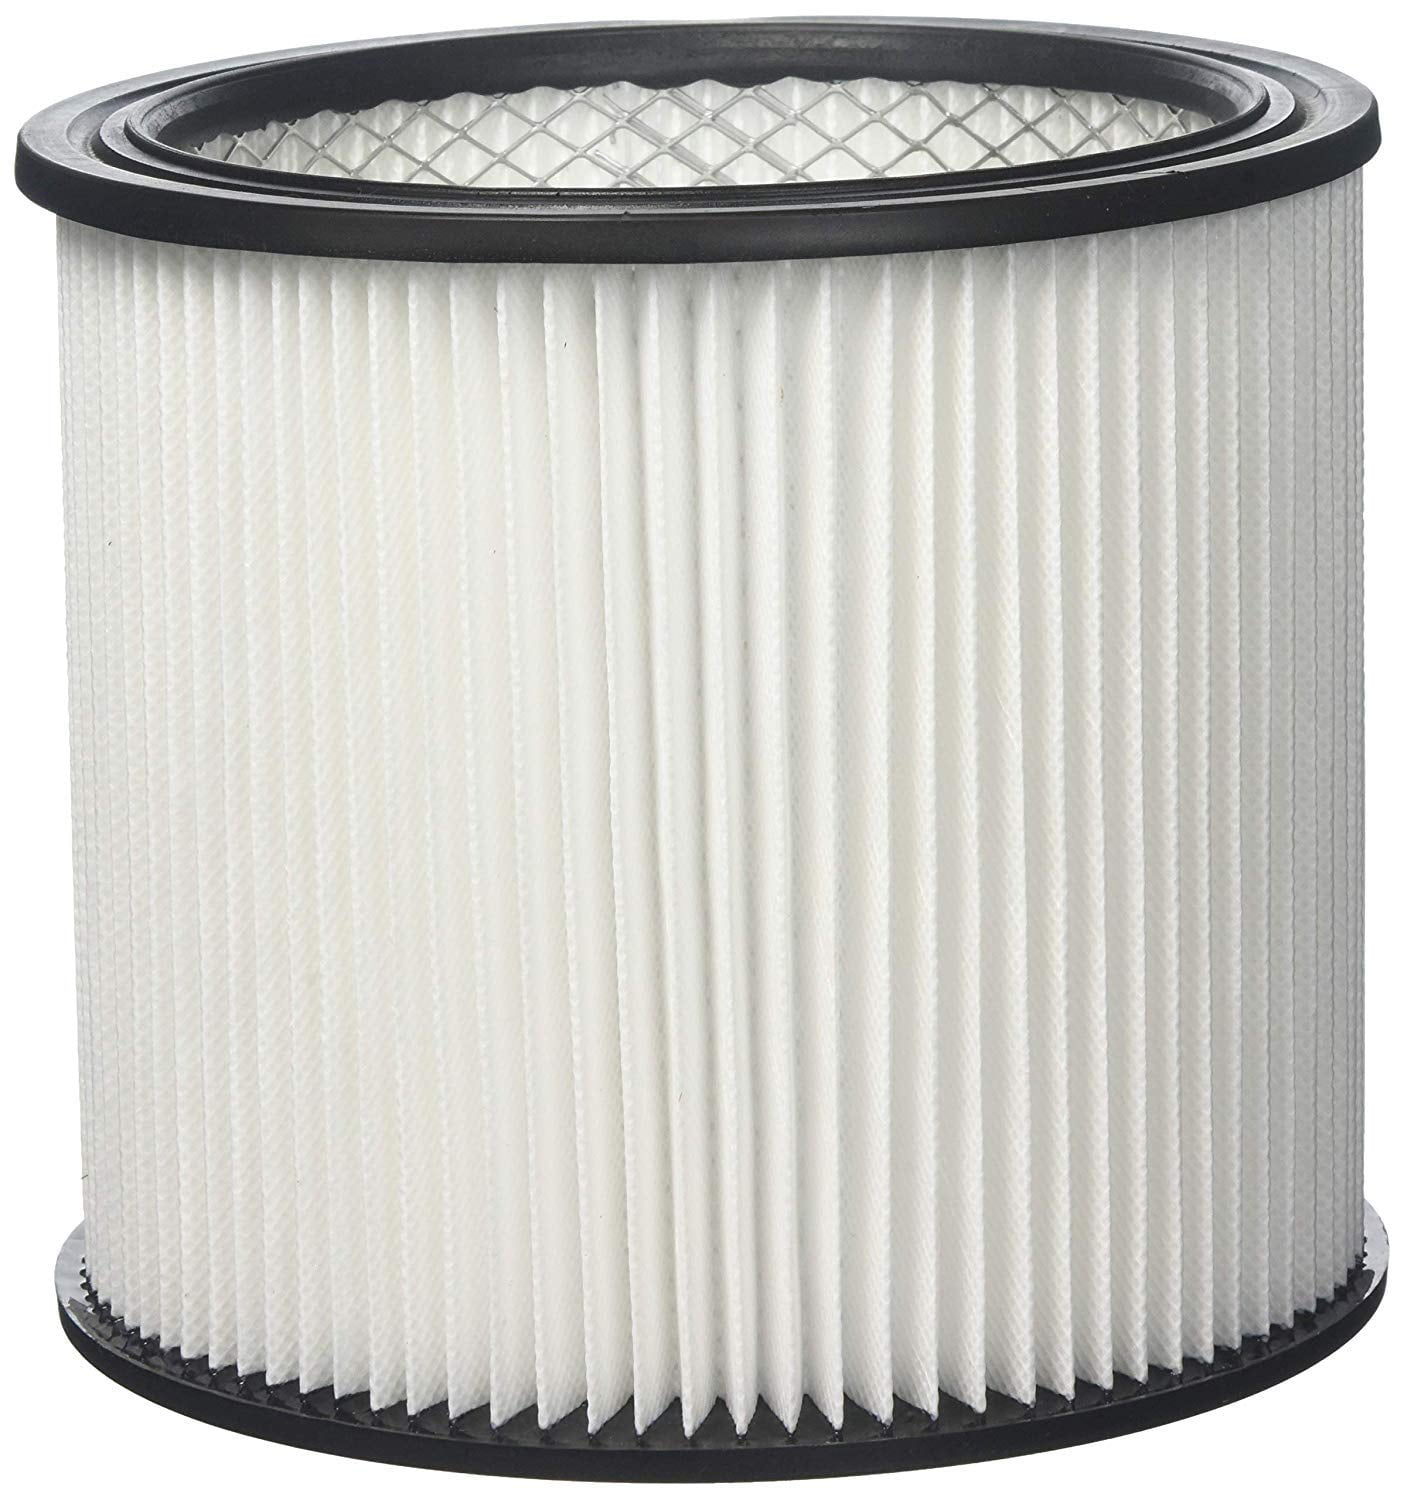 Cartridges Filter 90304 For Most Shop Vac Wet/Dry Vacuum Cleaners Replacement 